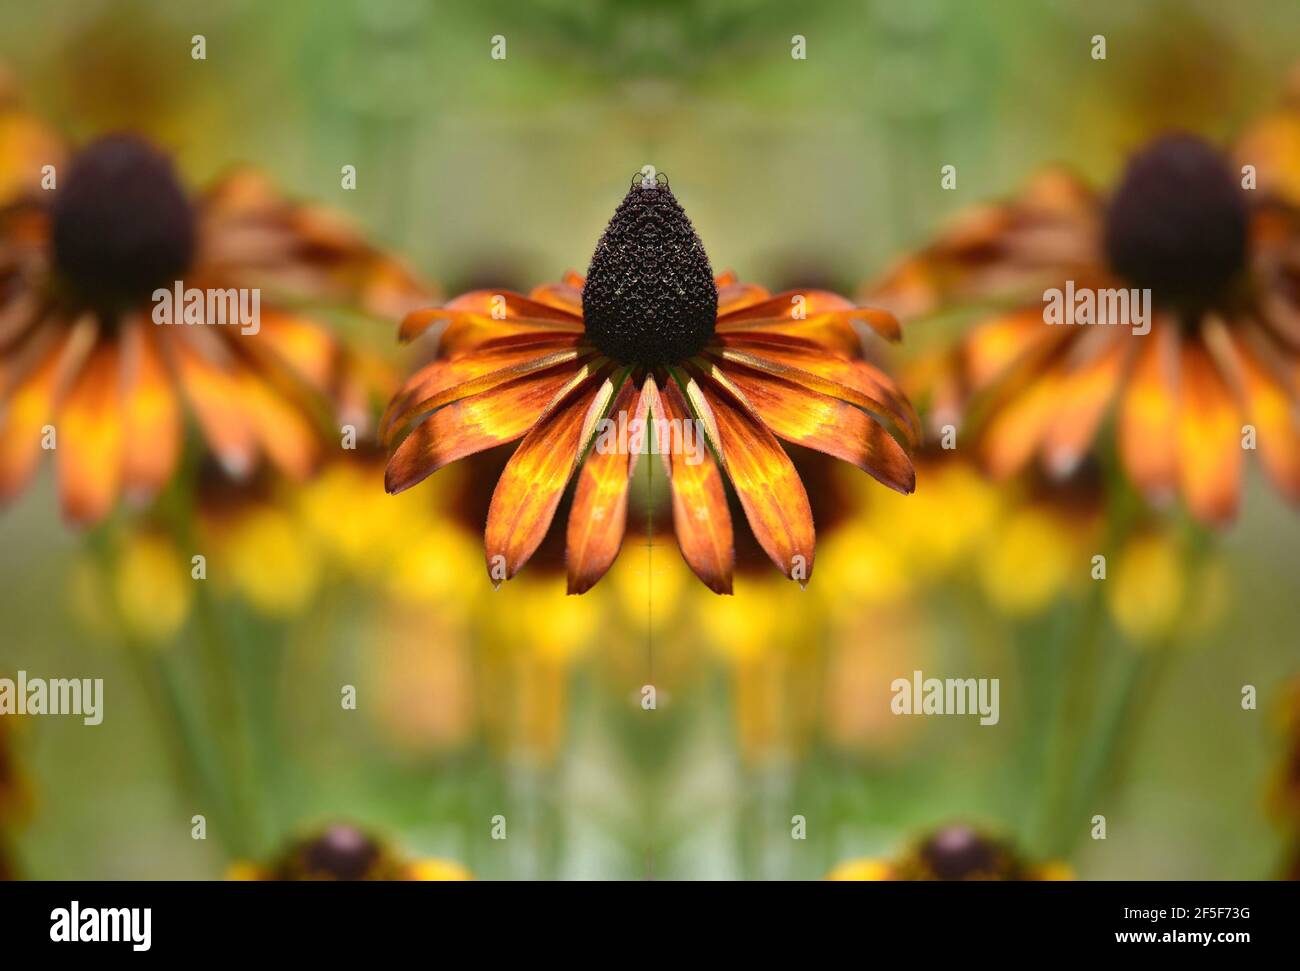 Helenium autumnale (Common sneezeweed) a daisy-like flowering plant with yellow-maroon ray florets on an abstract composition. Stock Photo